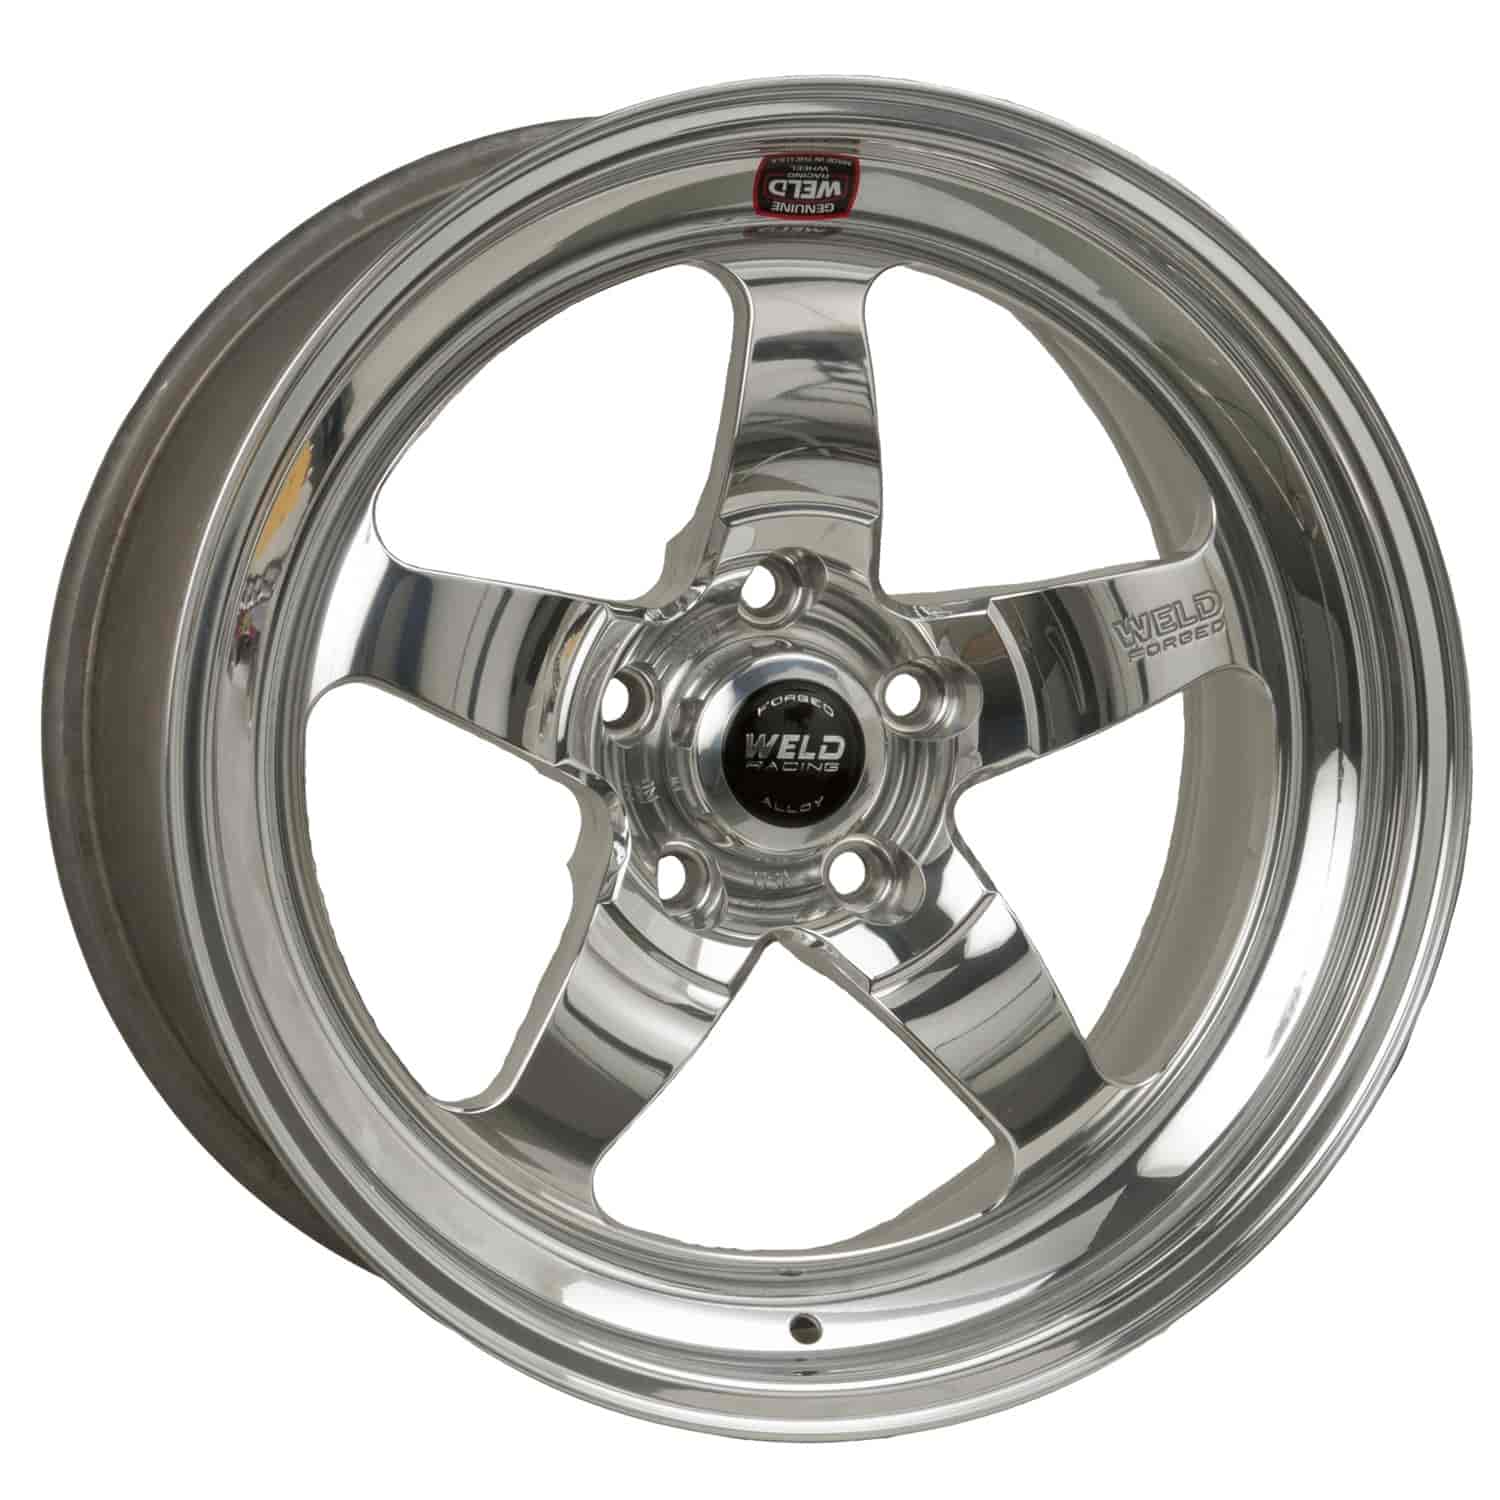 RT-S Series Wheel Size: 18" x 9" Bolt Circle: 5 x 4.75" Rear Spacing: 5.10" Polished